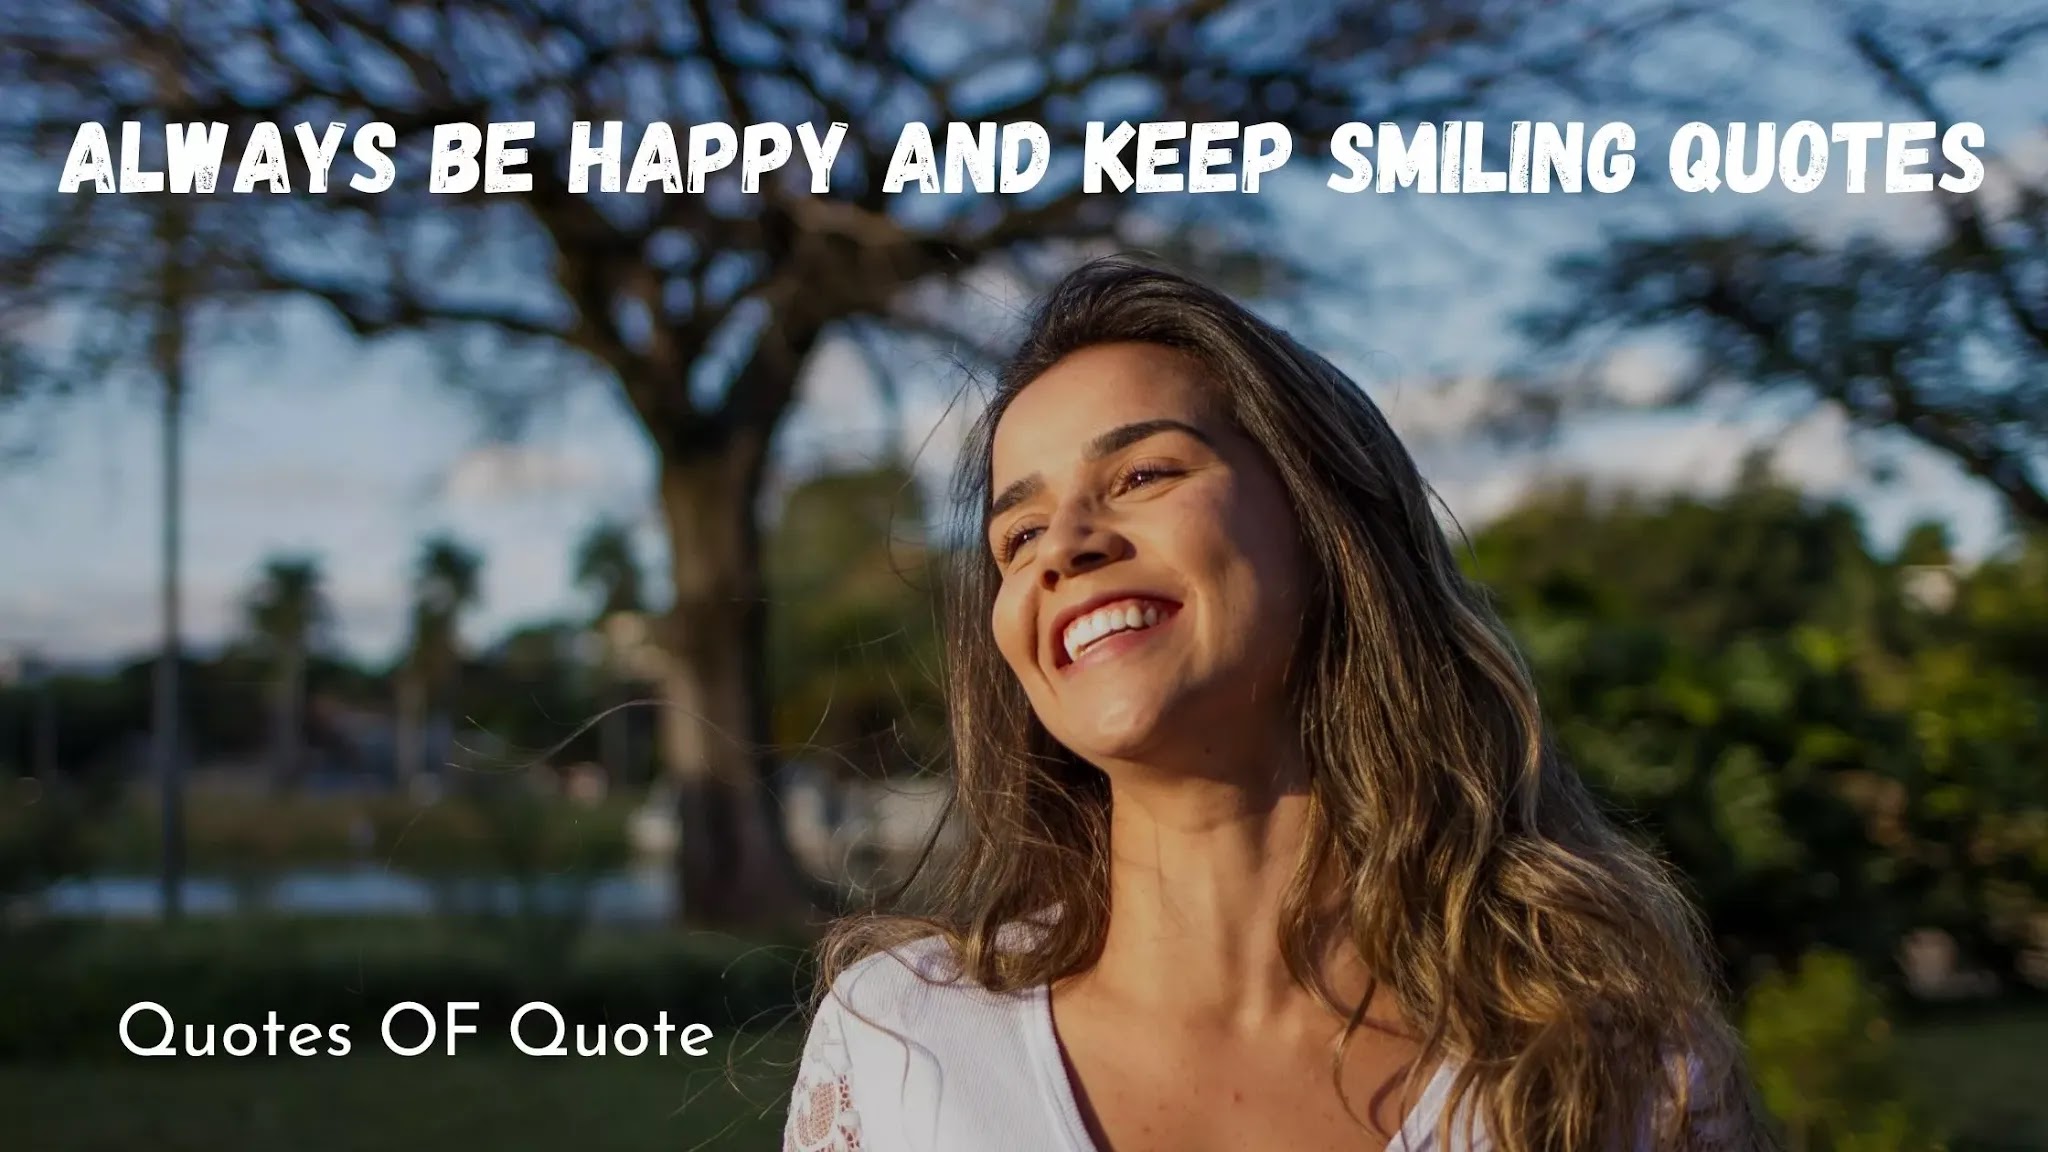 Always be happy and keep smiling quotes